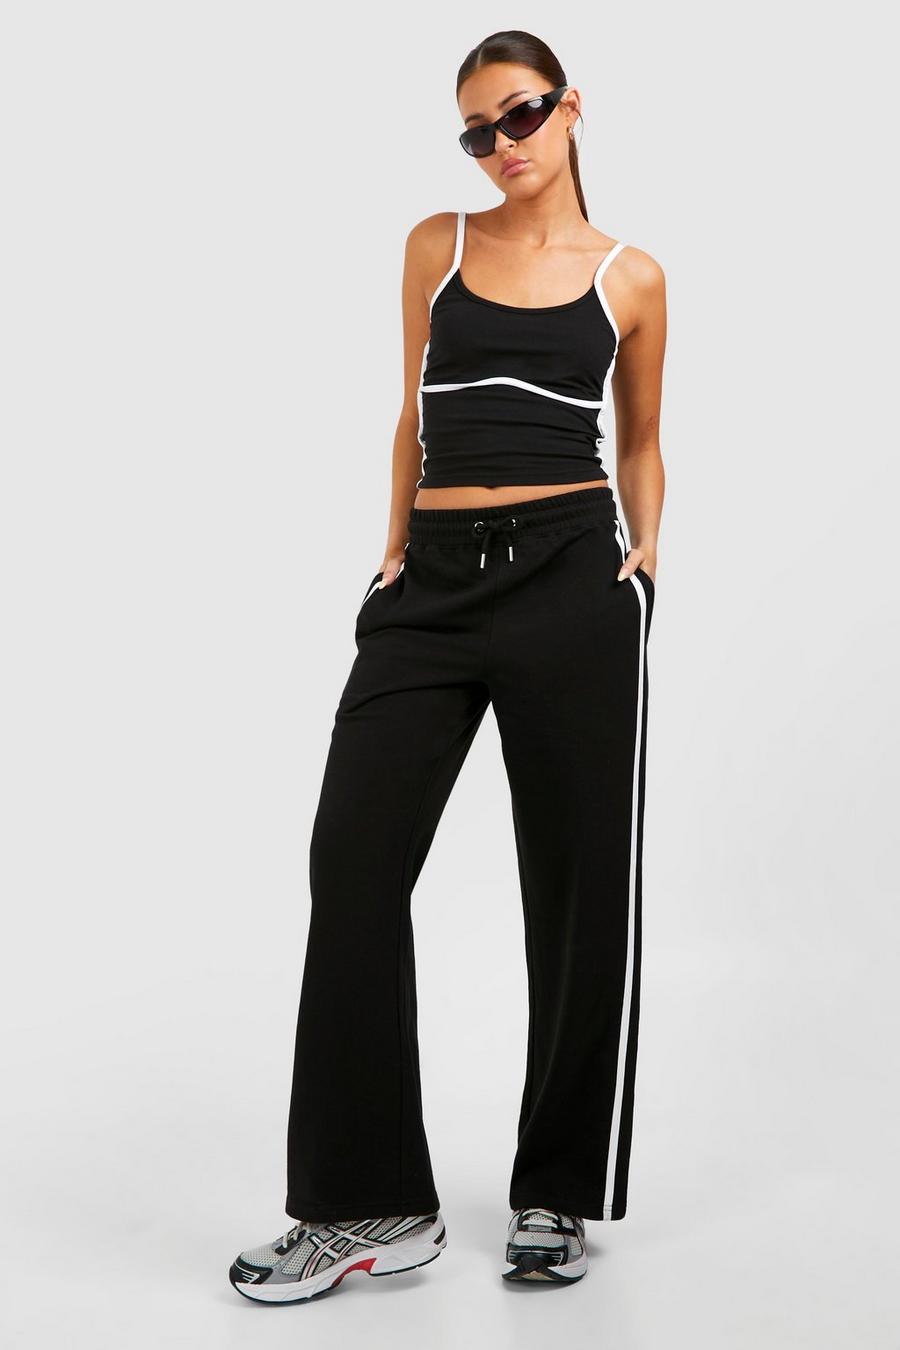 Black Piping Detail Vest Top And Straight Leg Jogger Set